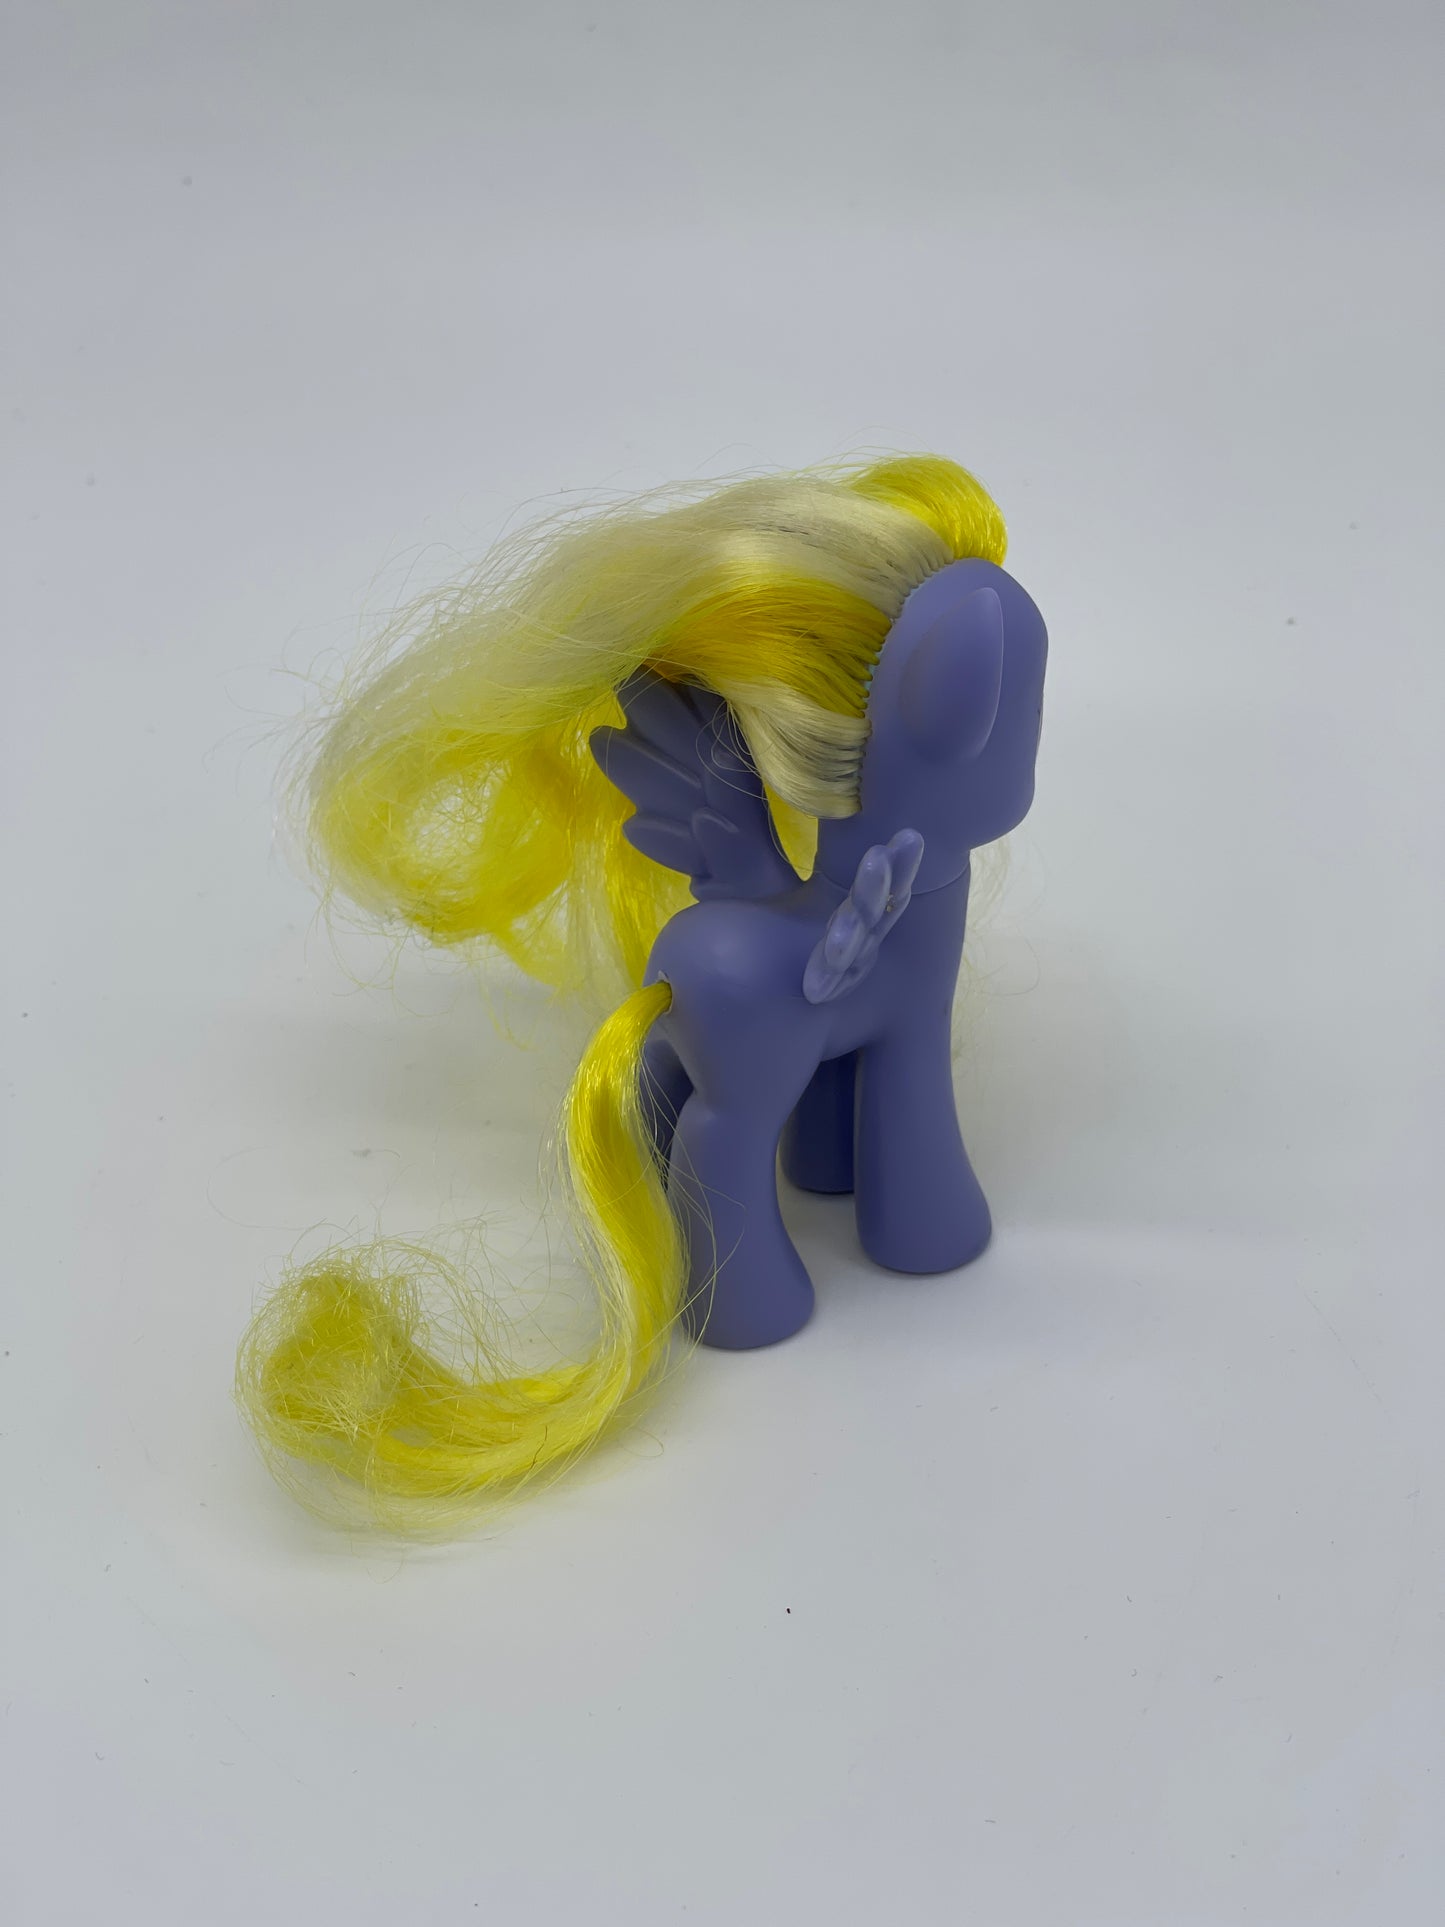 My Little Pony "Lily Blossom" C-029A G4 Hasbro (2010)